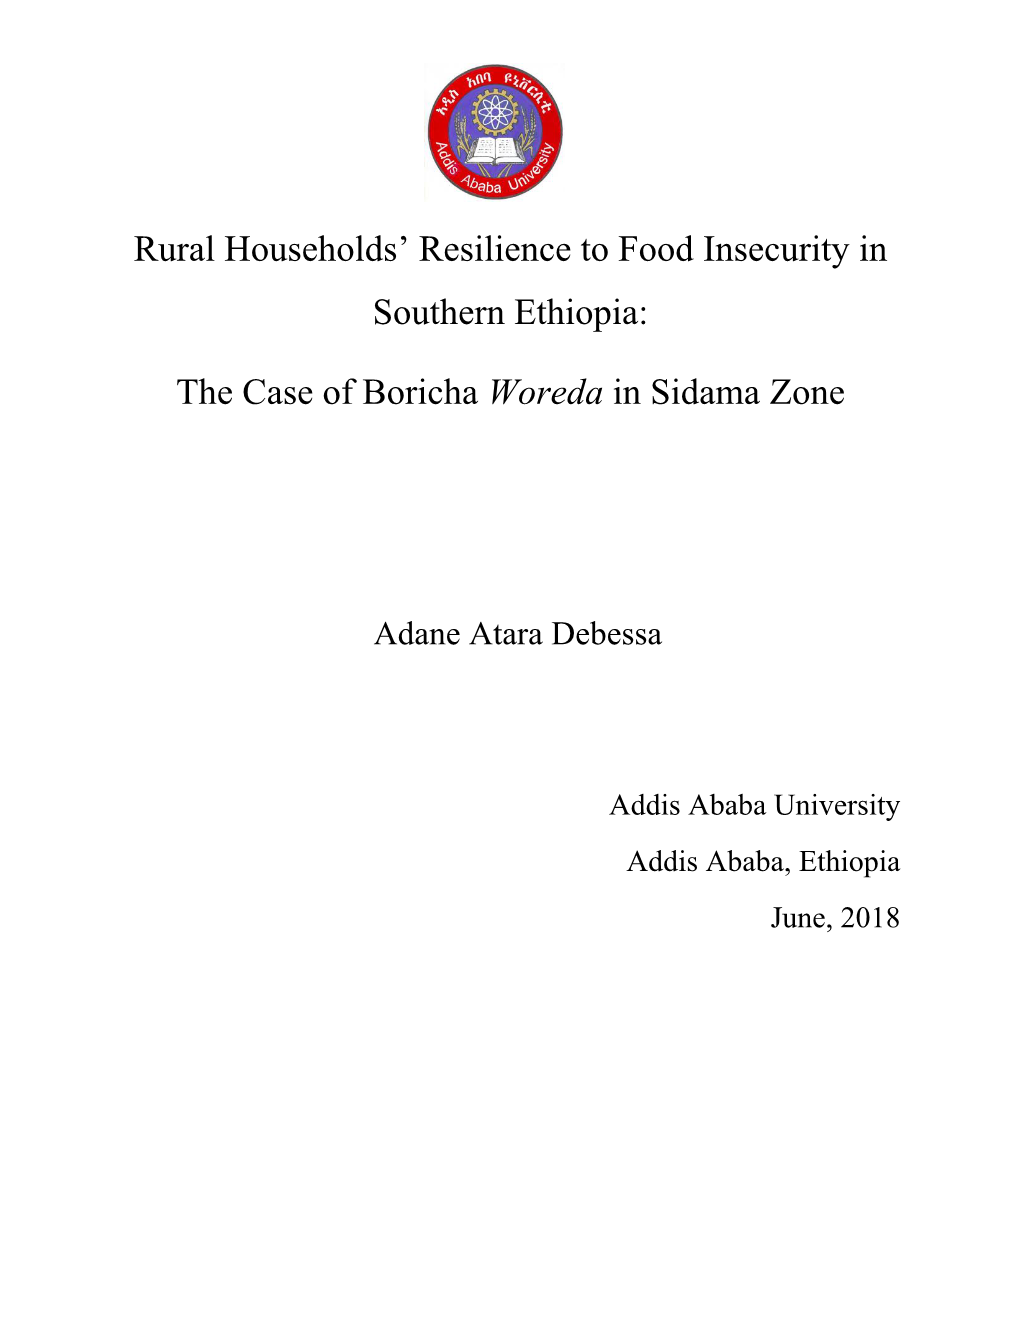 Rural Households' Resilience to Food Insecurity in Southern Ethiopia: The